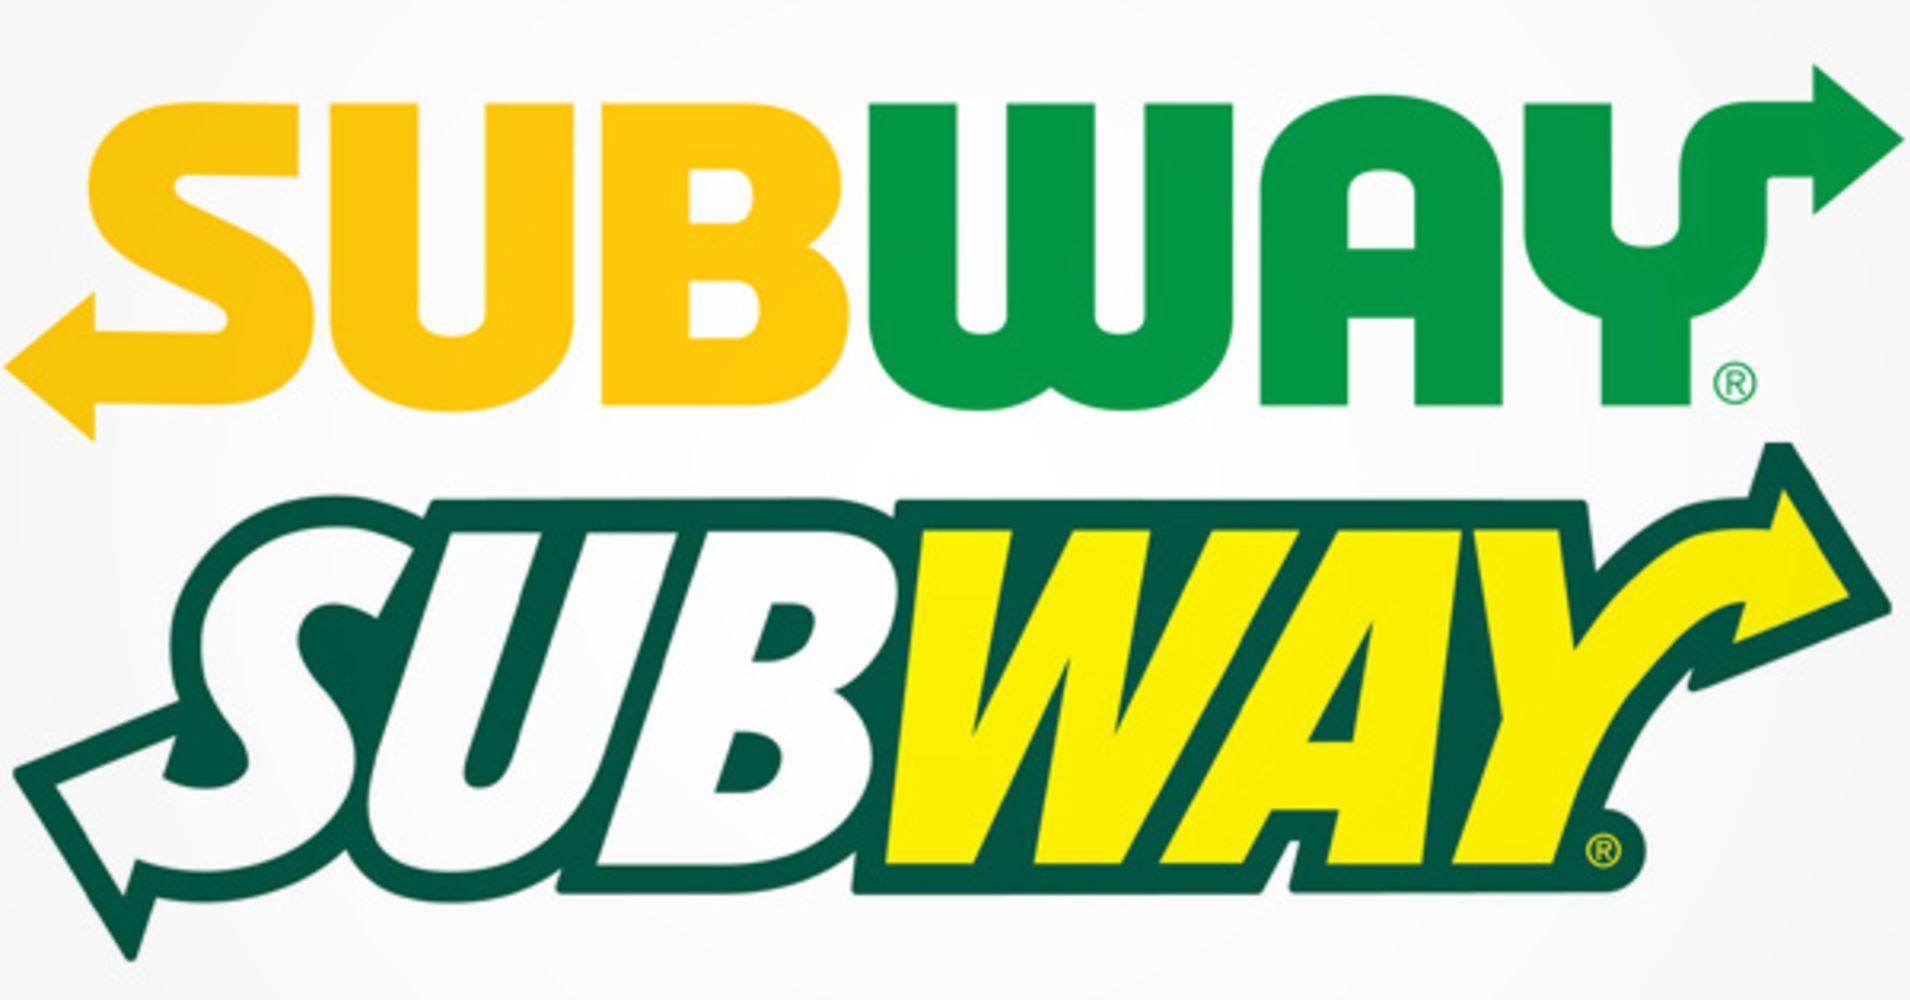 Old Subway Logo - After 15 years, Subway has a brand new logo